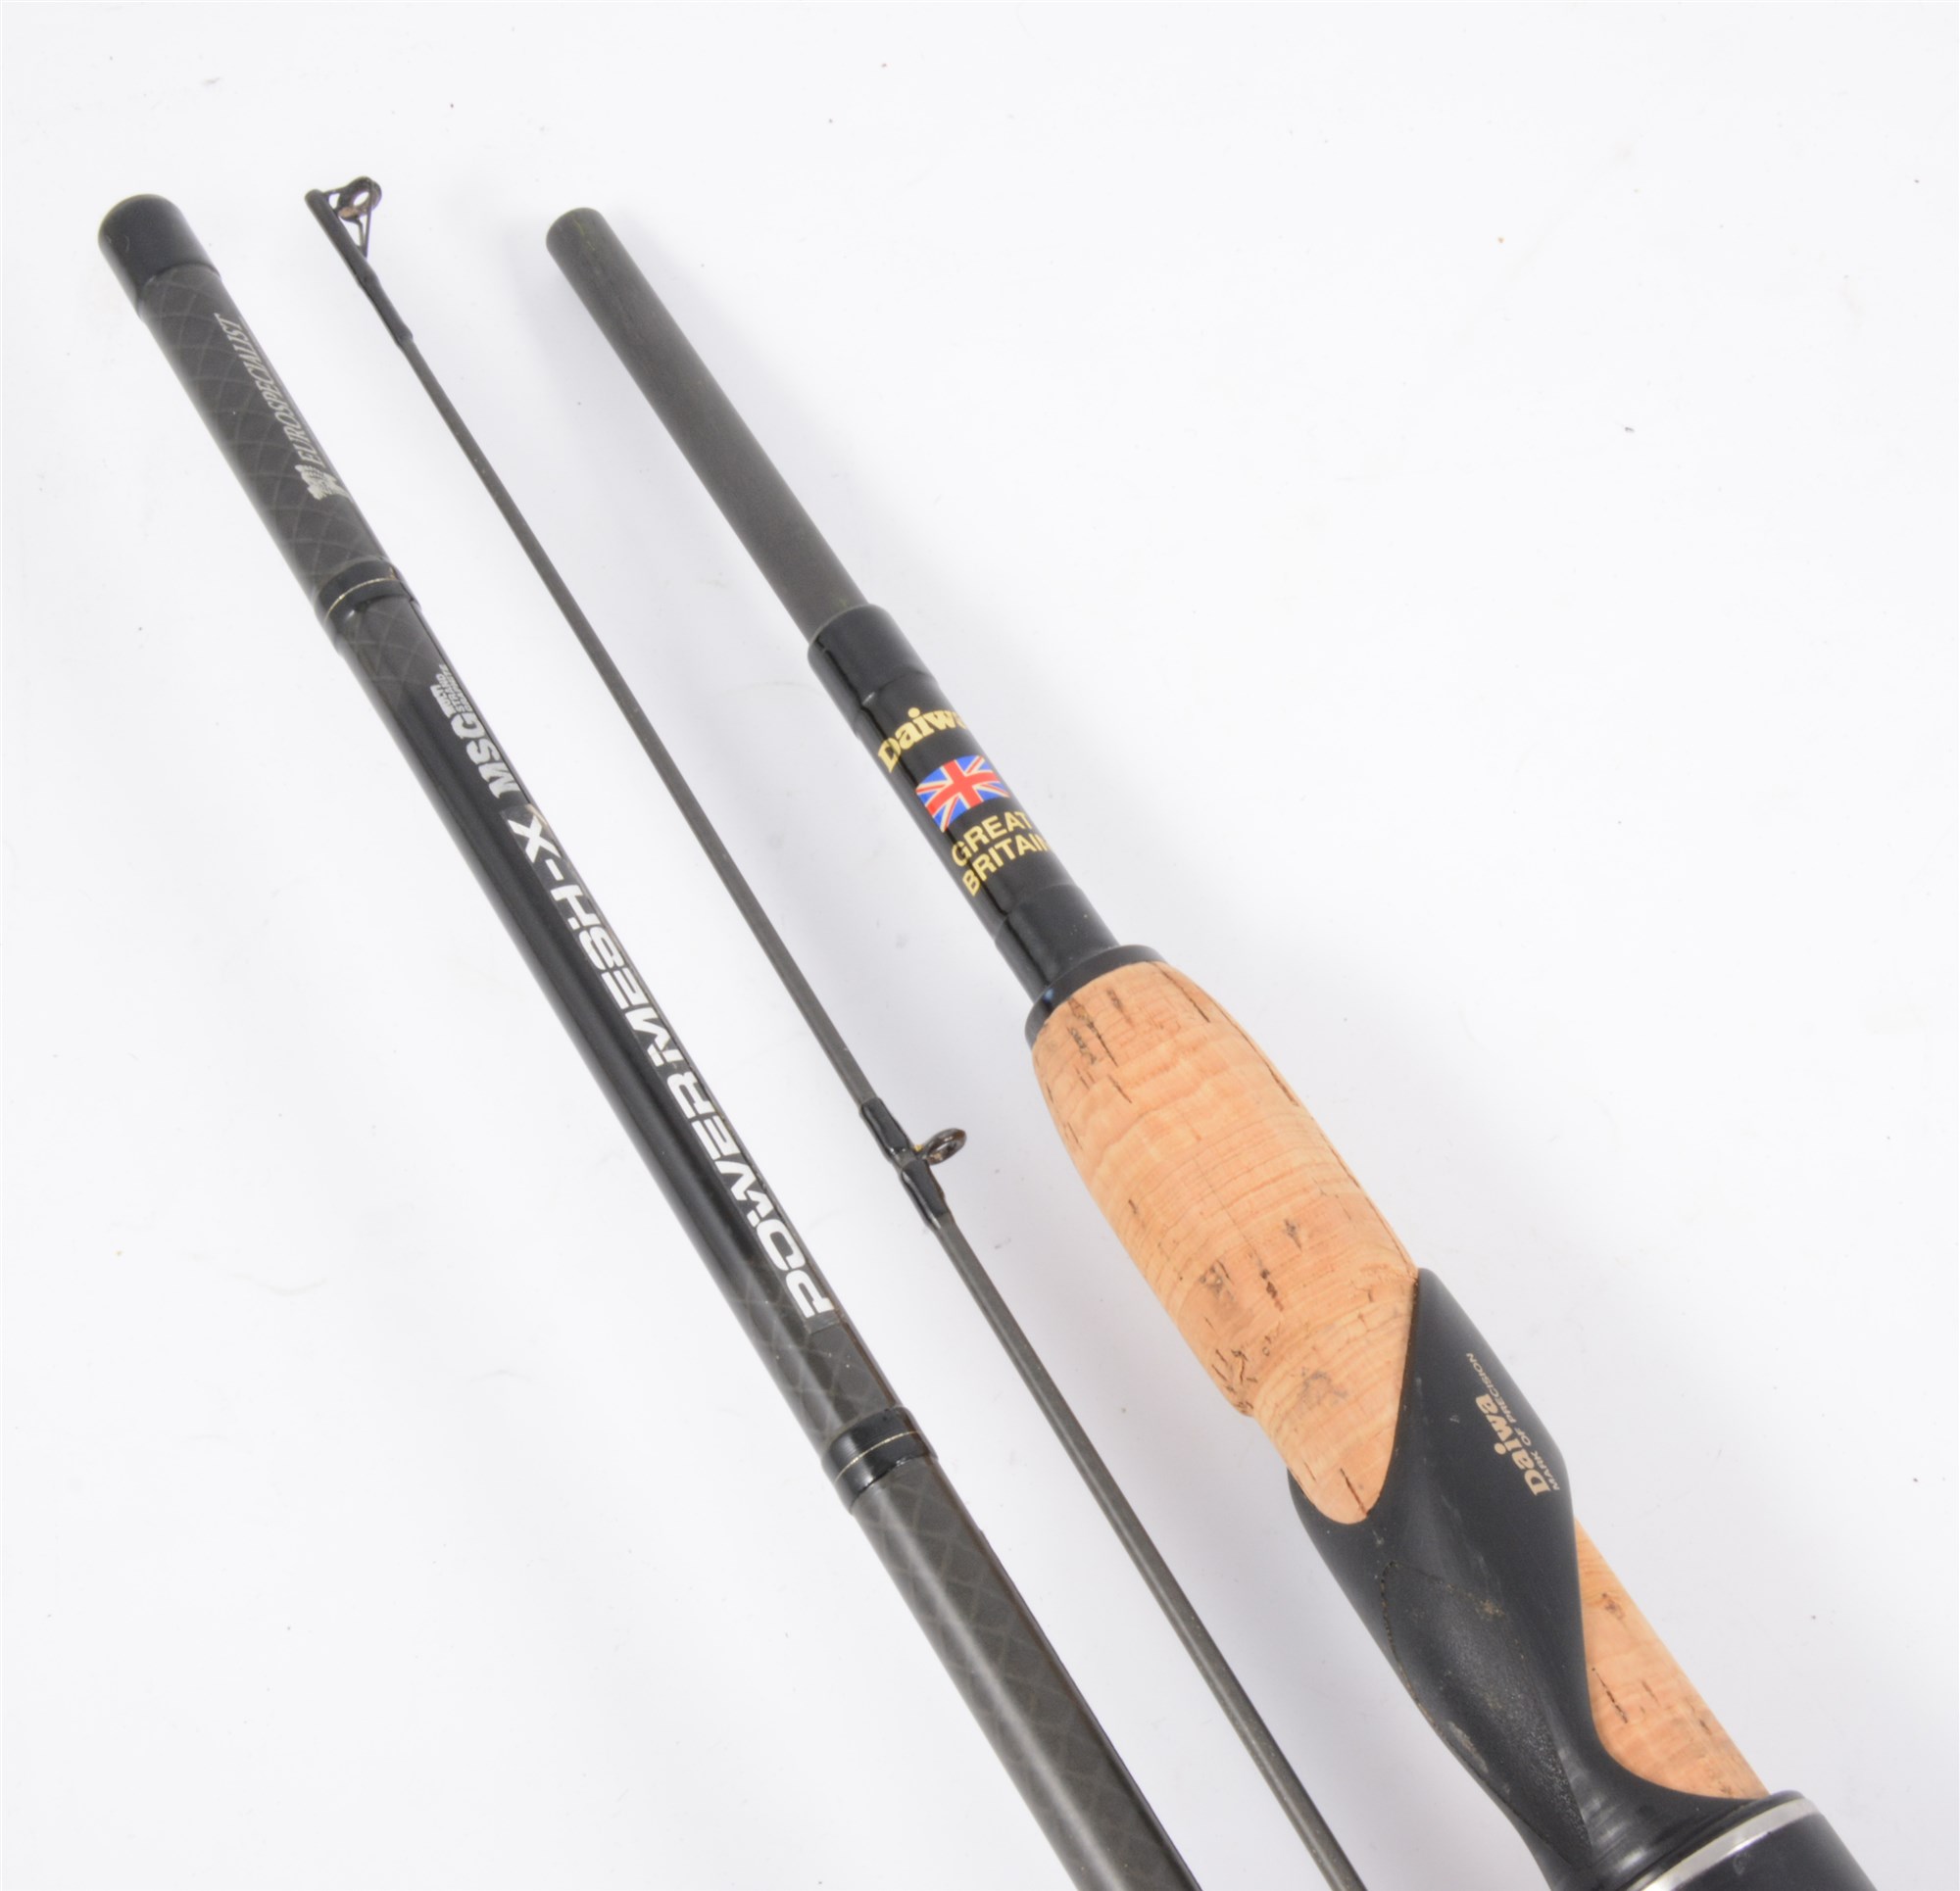 Two carbon fibre match fishing rods